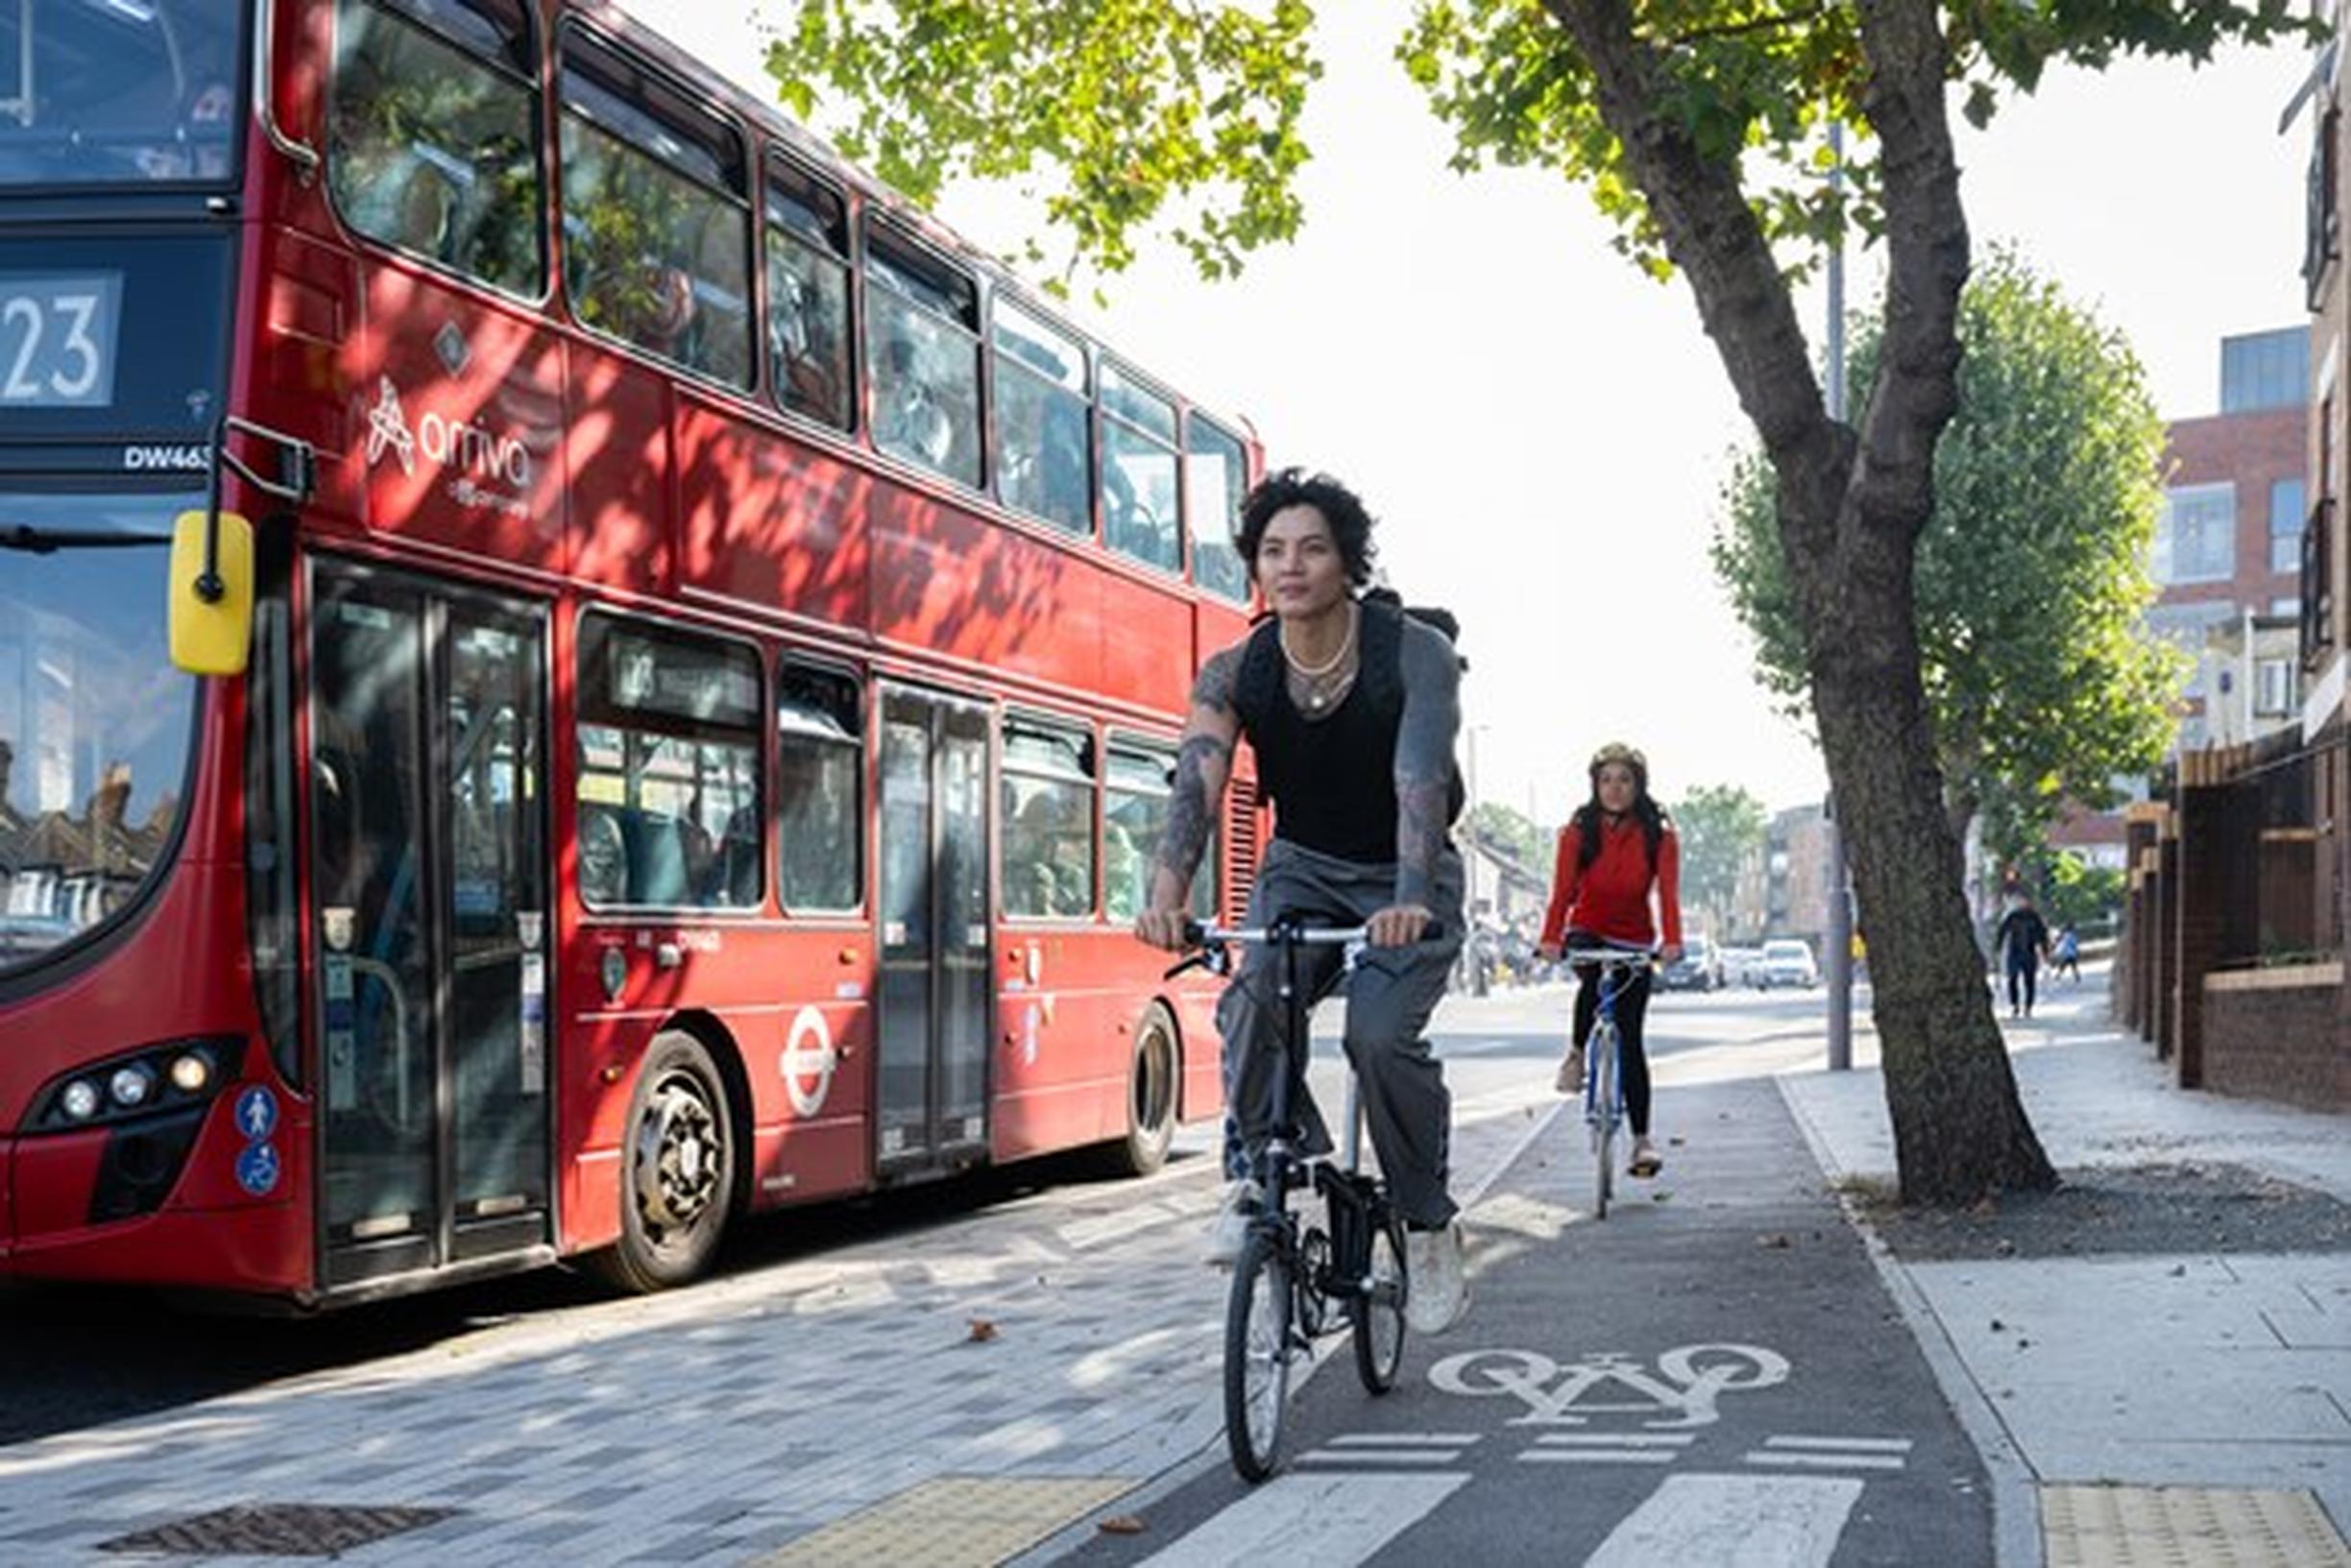 Daily cycle journeys in the capital increased in 2023, with an estimated 1.26 million journeys per day, up by 6.3% from 1.19 million in 2022